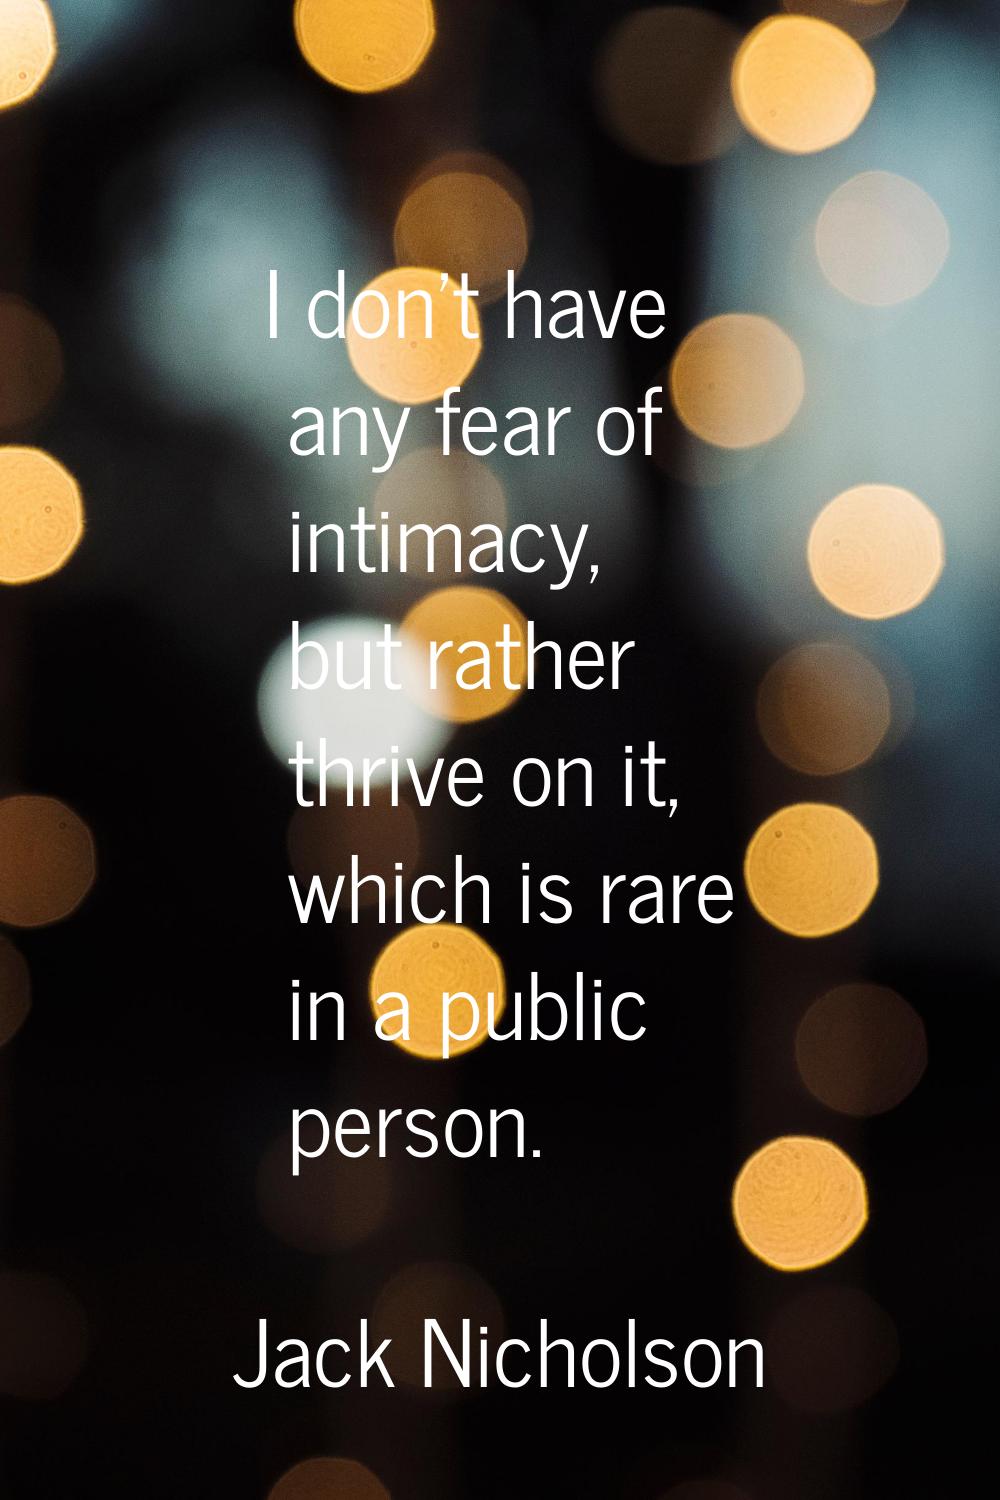 I don't have any fear of intimacy, but rather thrive on it, which is rare in a public person.